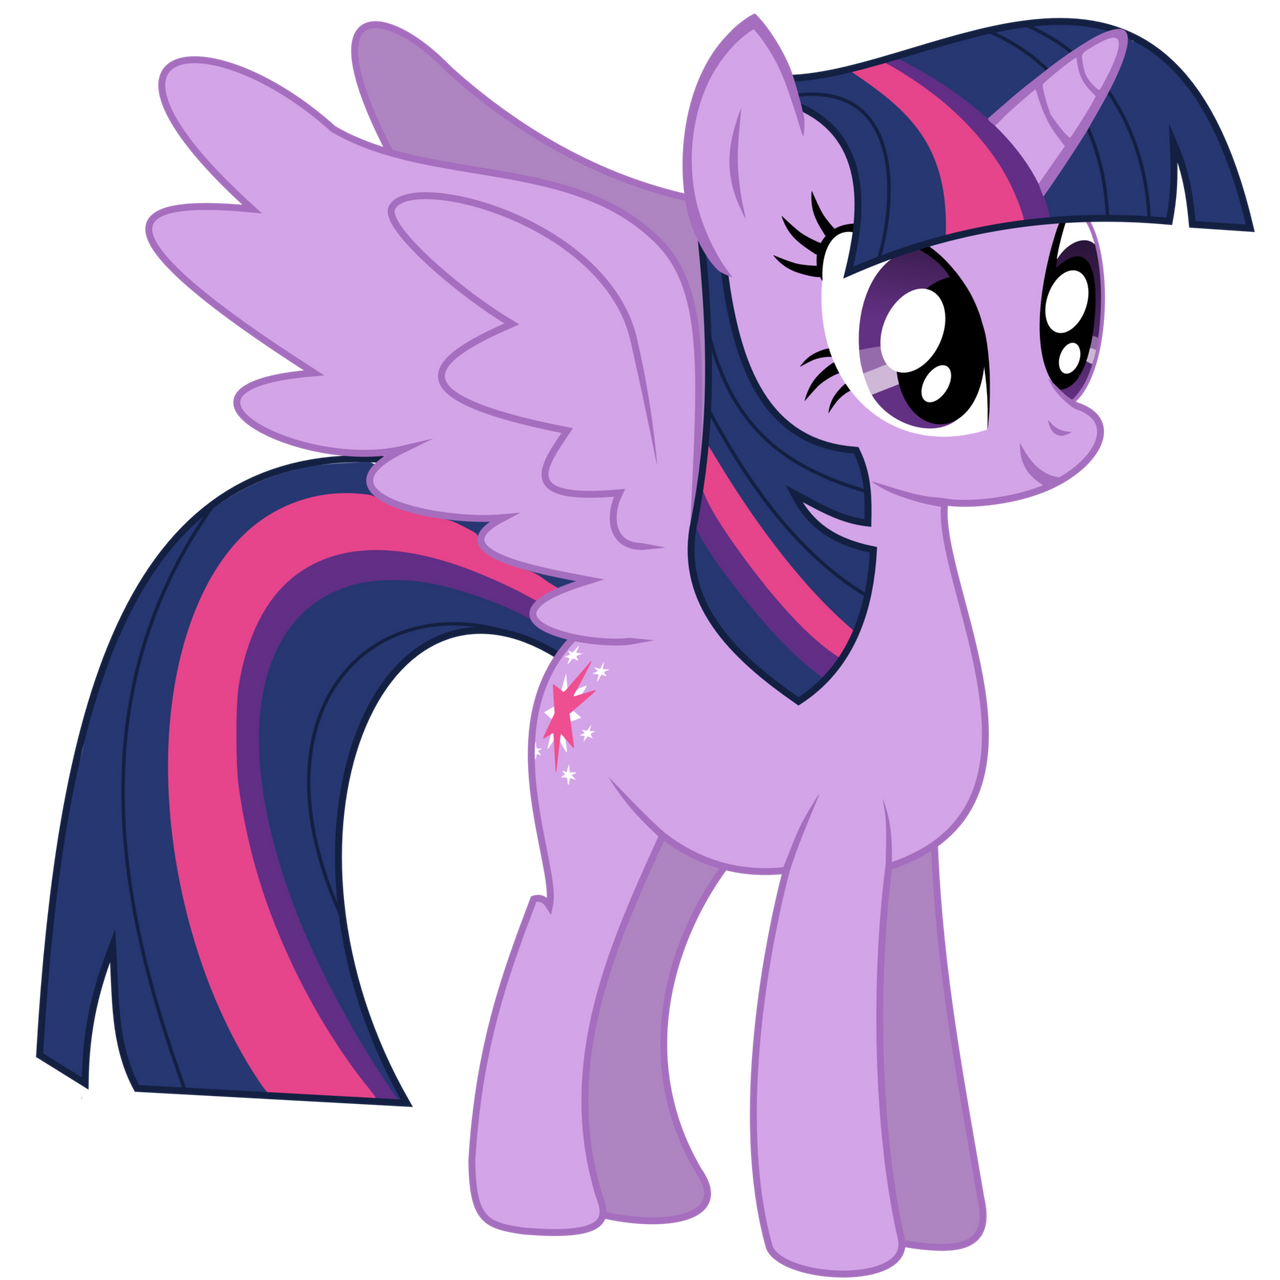 Twilight Sparkle from My Little Pony